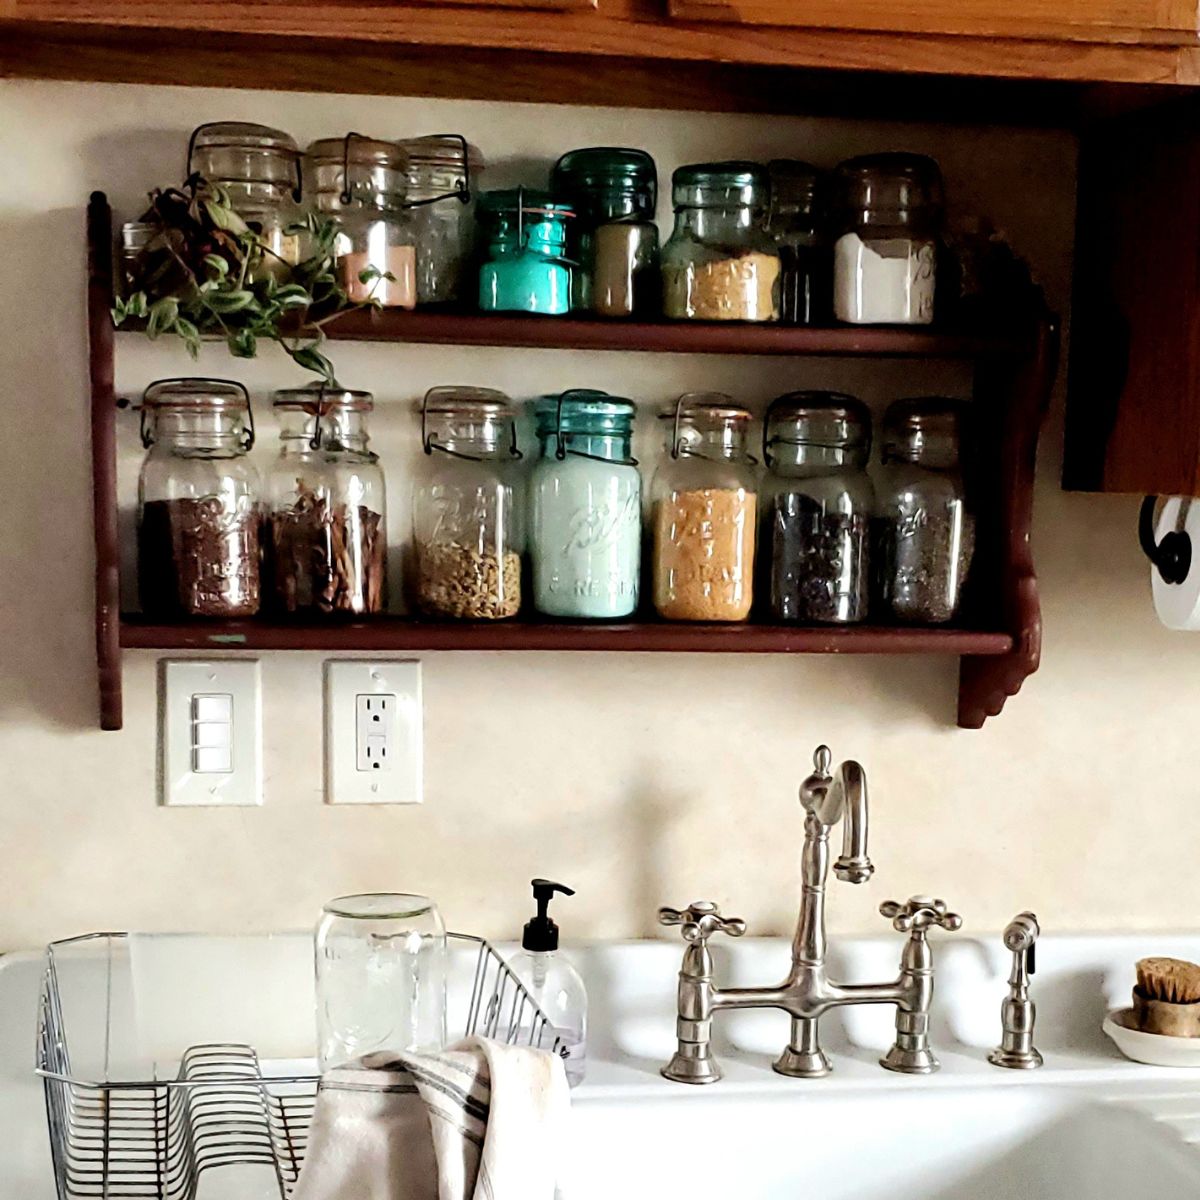 Can you use Antique Jars for Canning?